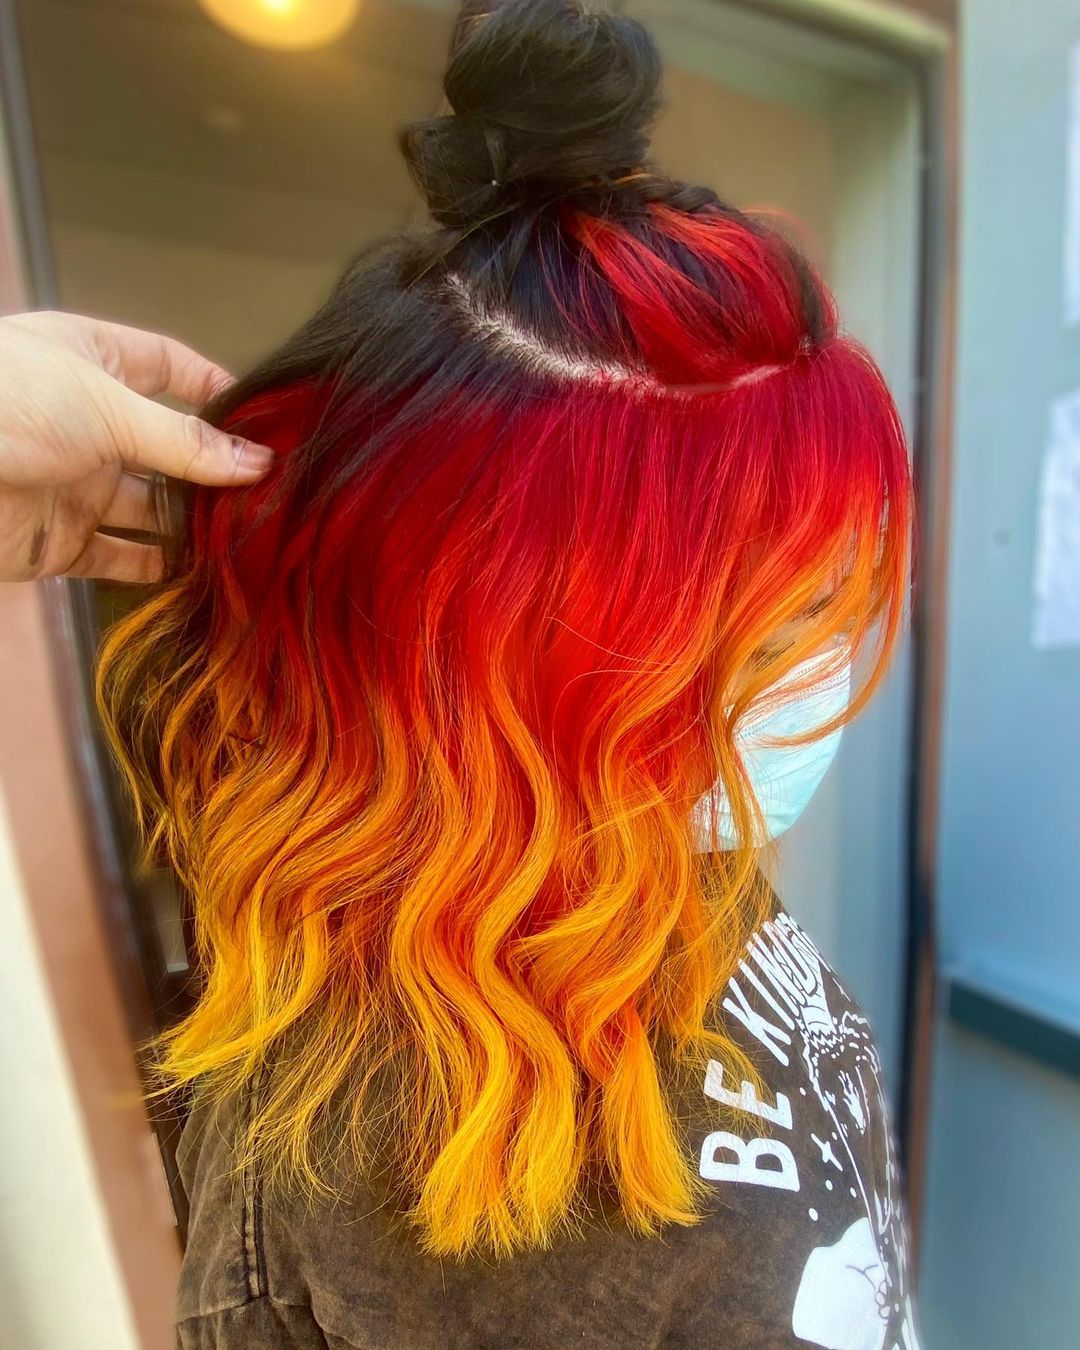 Black Red and Yellow Hair Look